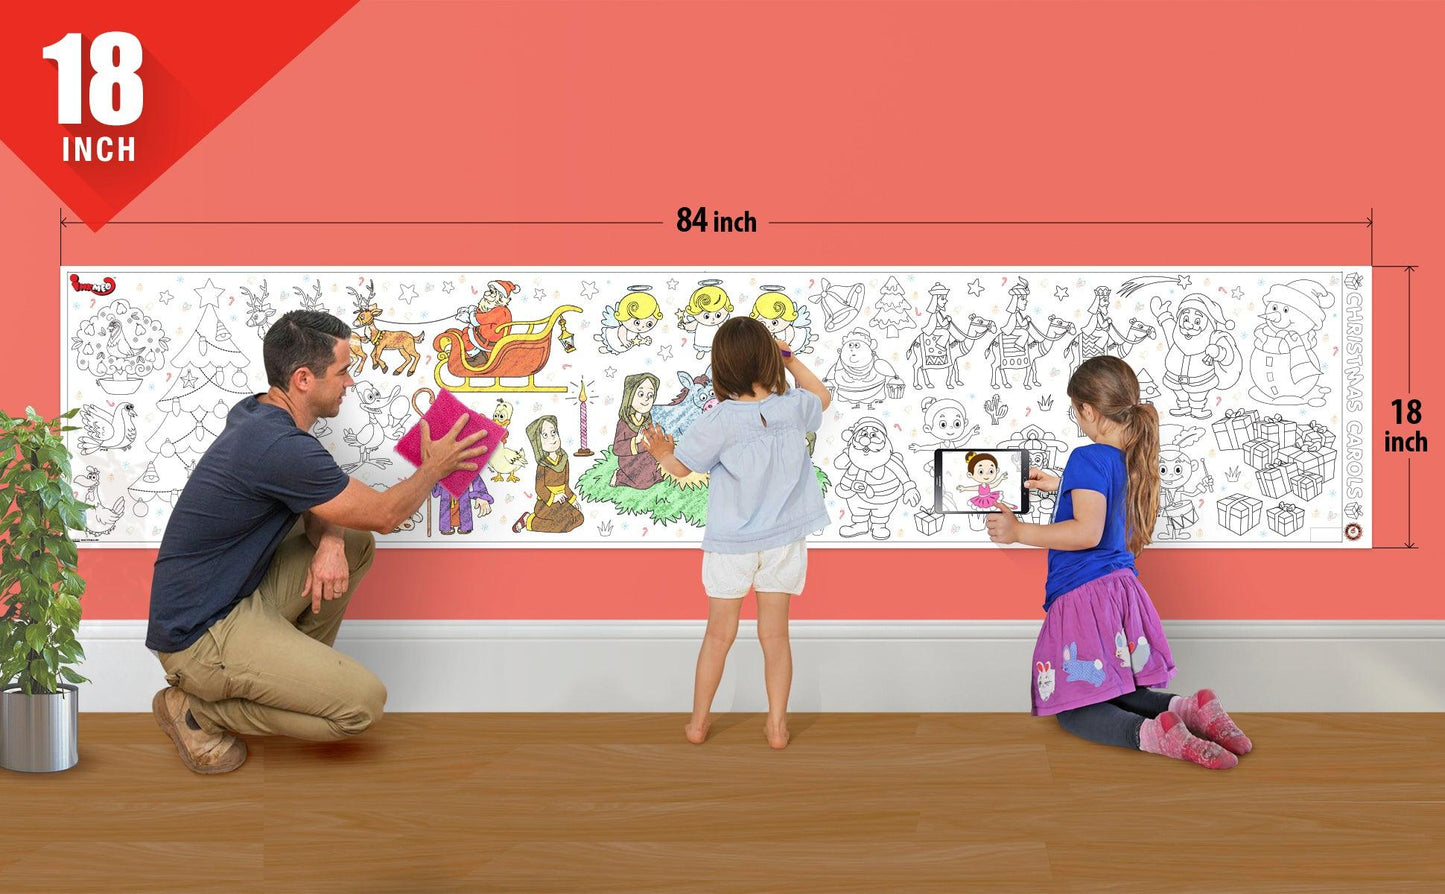 The image depicts a father and his two daughters enjoying a bonding moment while colouring christmas carols roll attached to the wall.